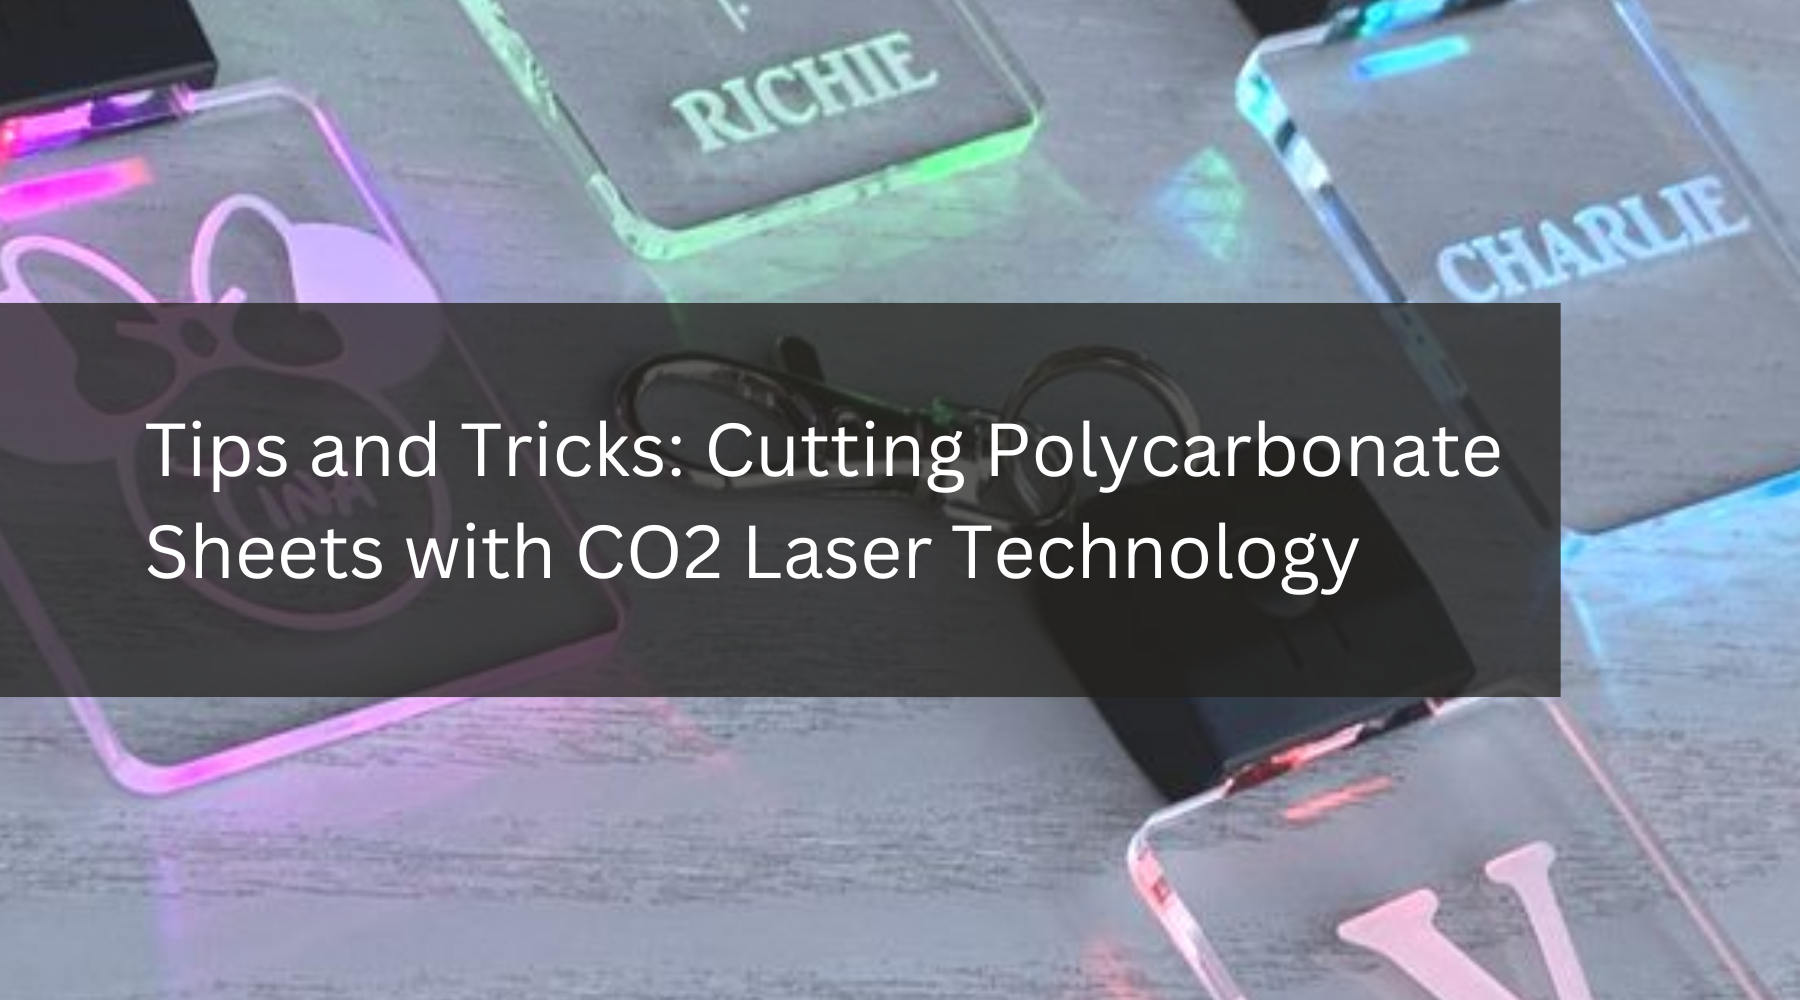 Tips and Tricks: Cutting Polycarbonate Sheets with CO2 Laser Technology